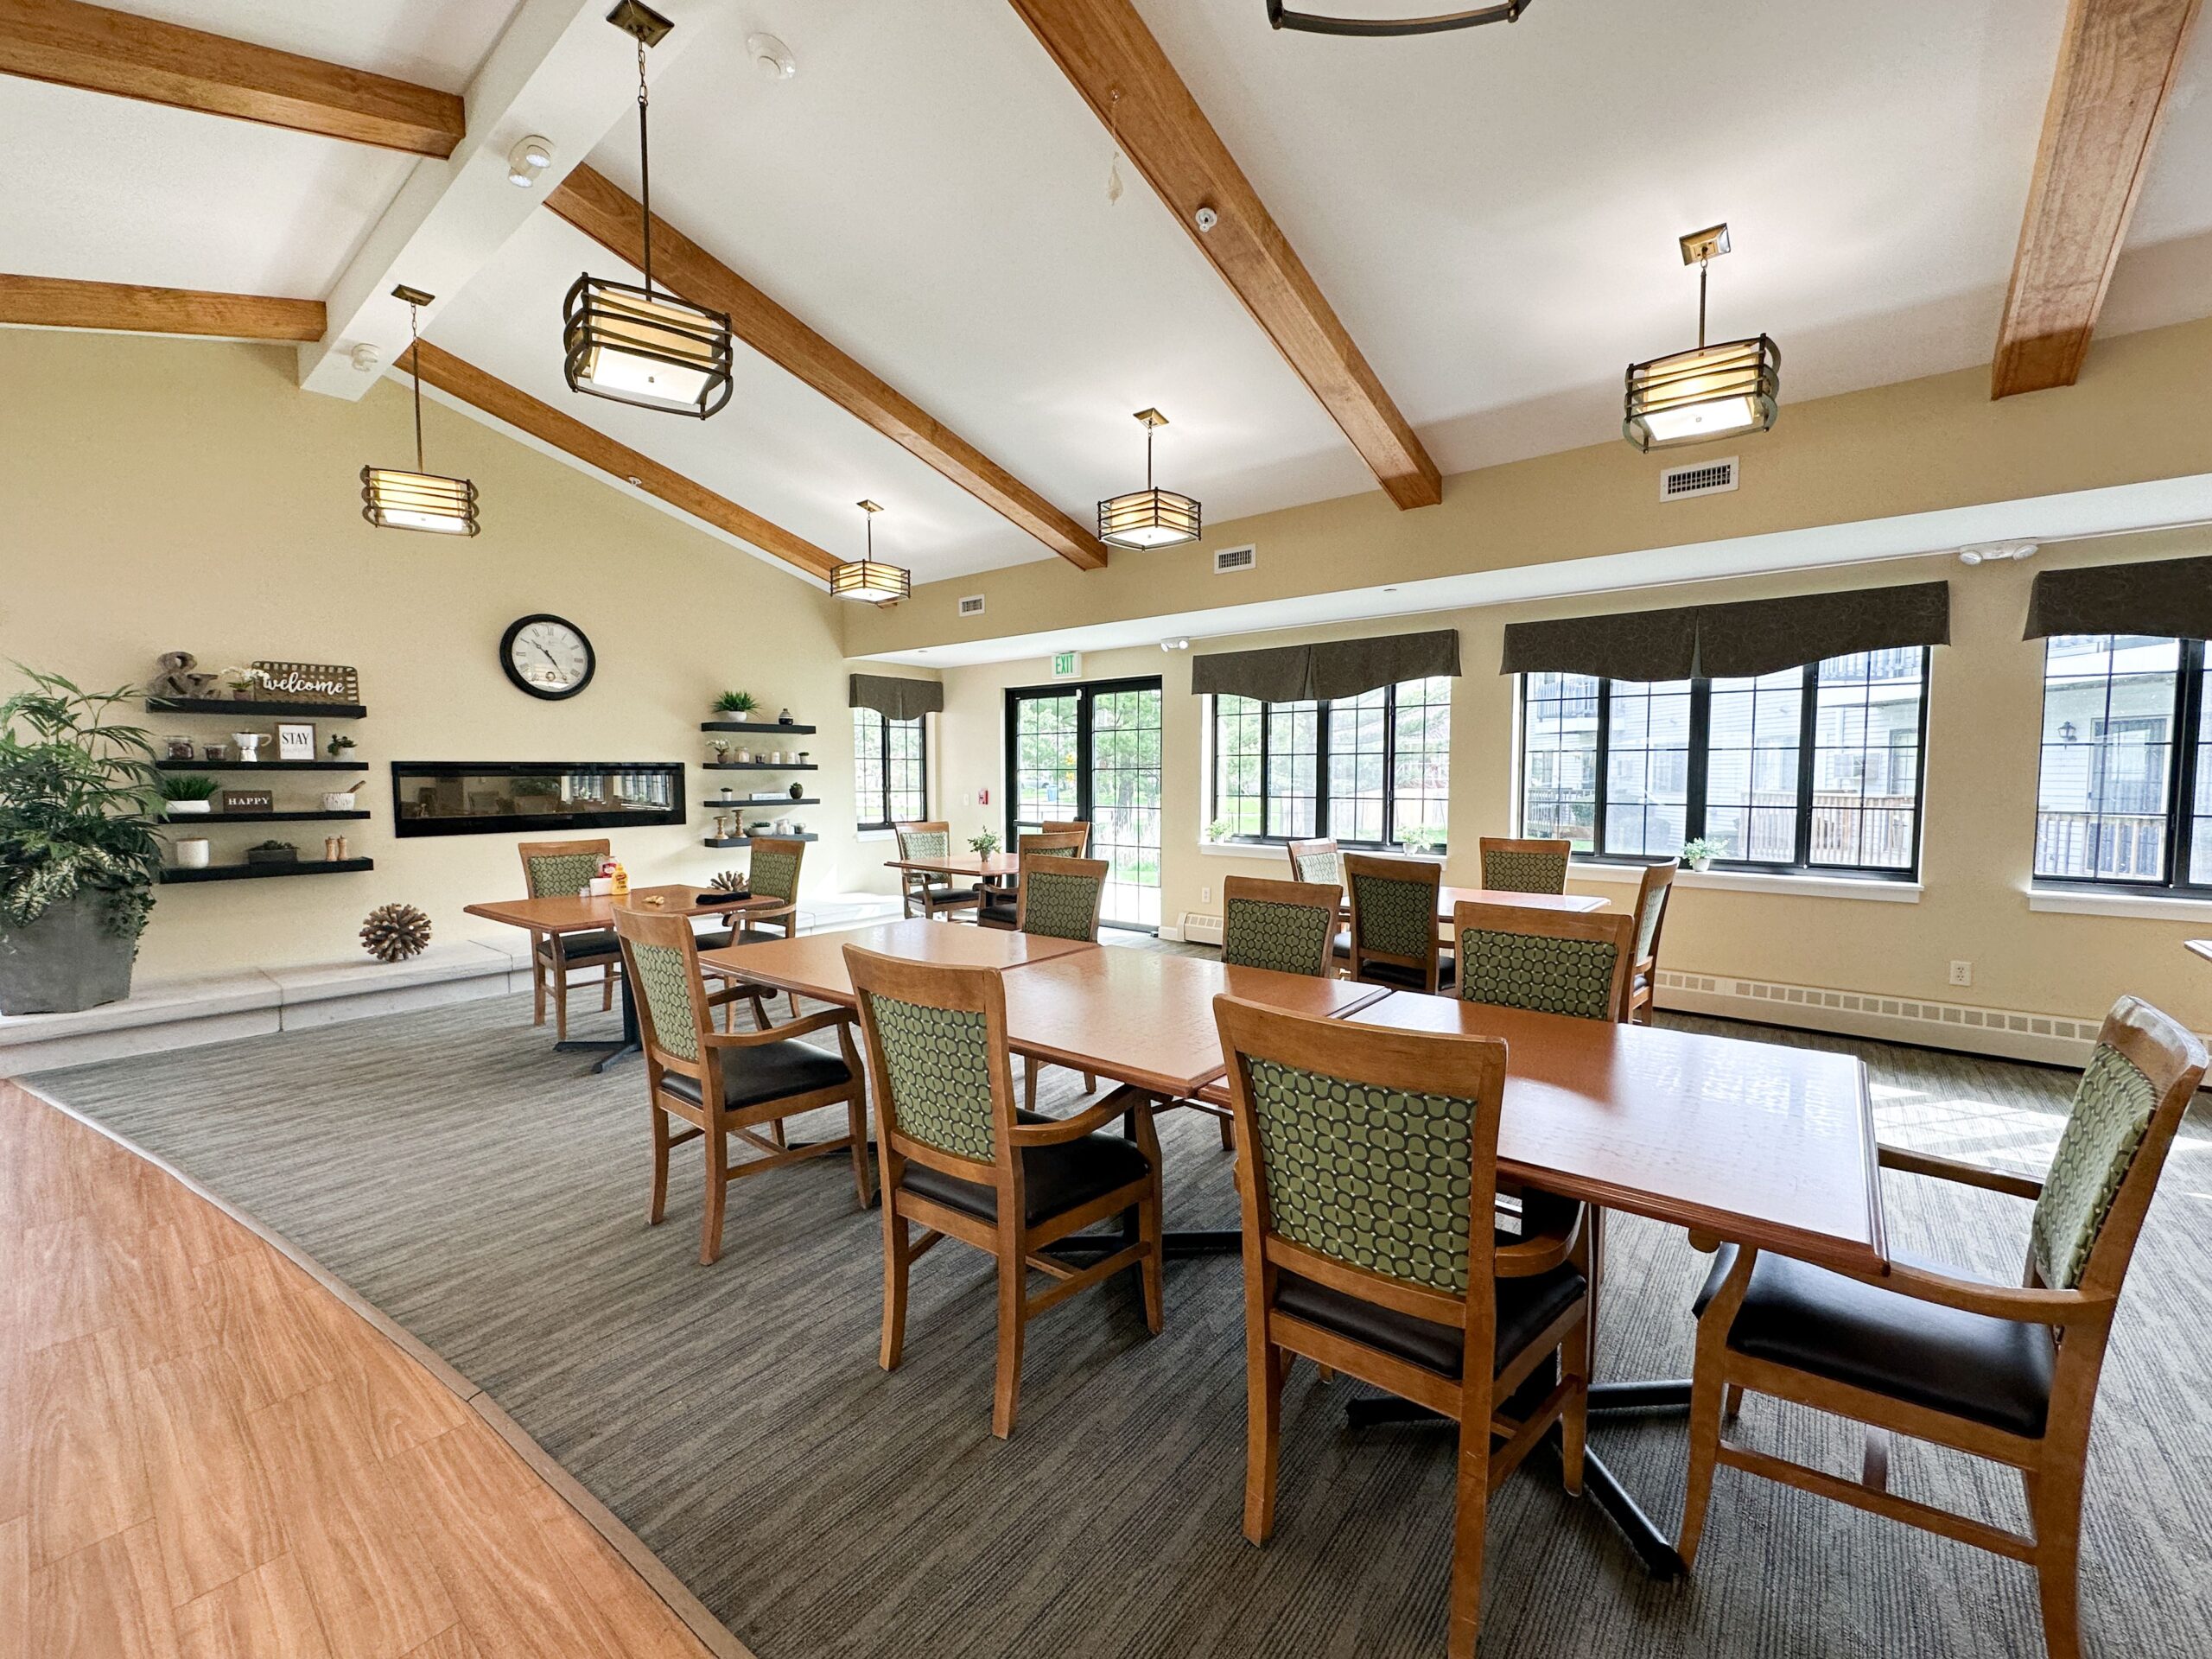 Multiple tables with seating next to large windows, and vaulted ceilings